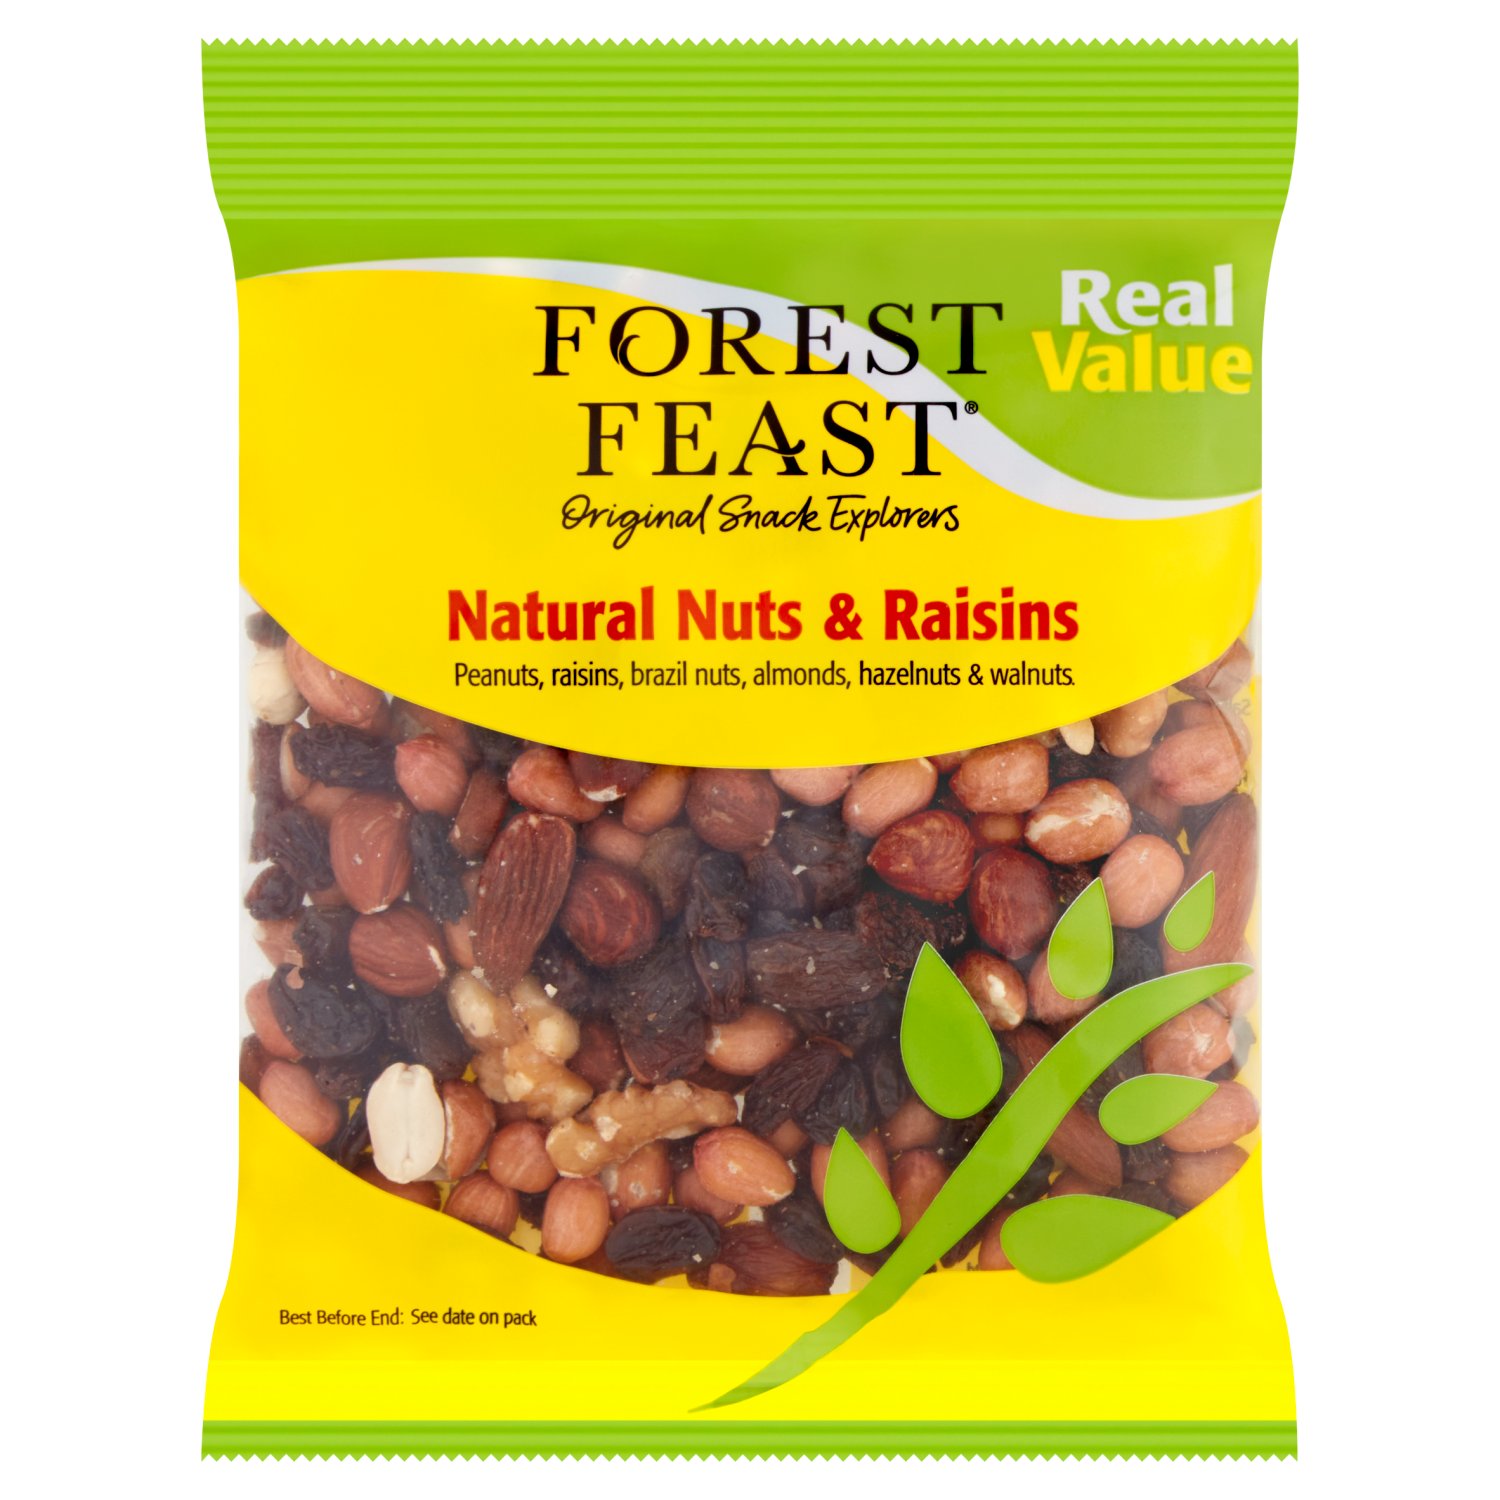 Forest Feast Real Value Natural Nuts & Raisins Bag (175 g)